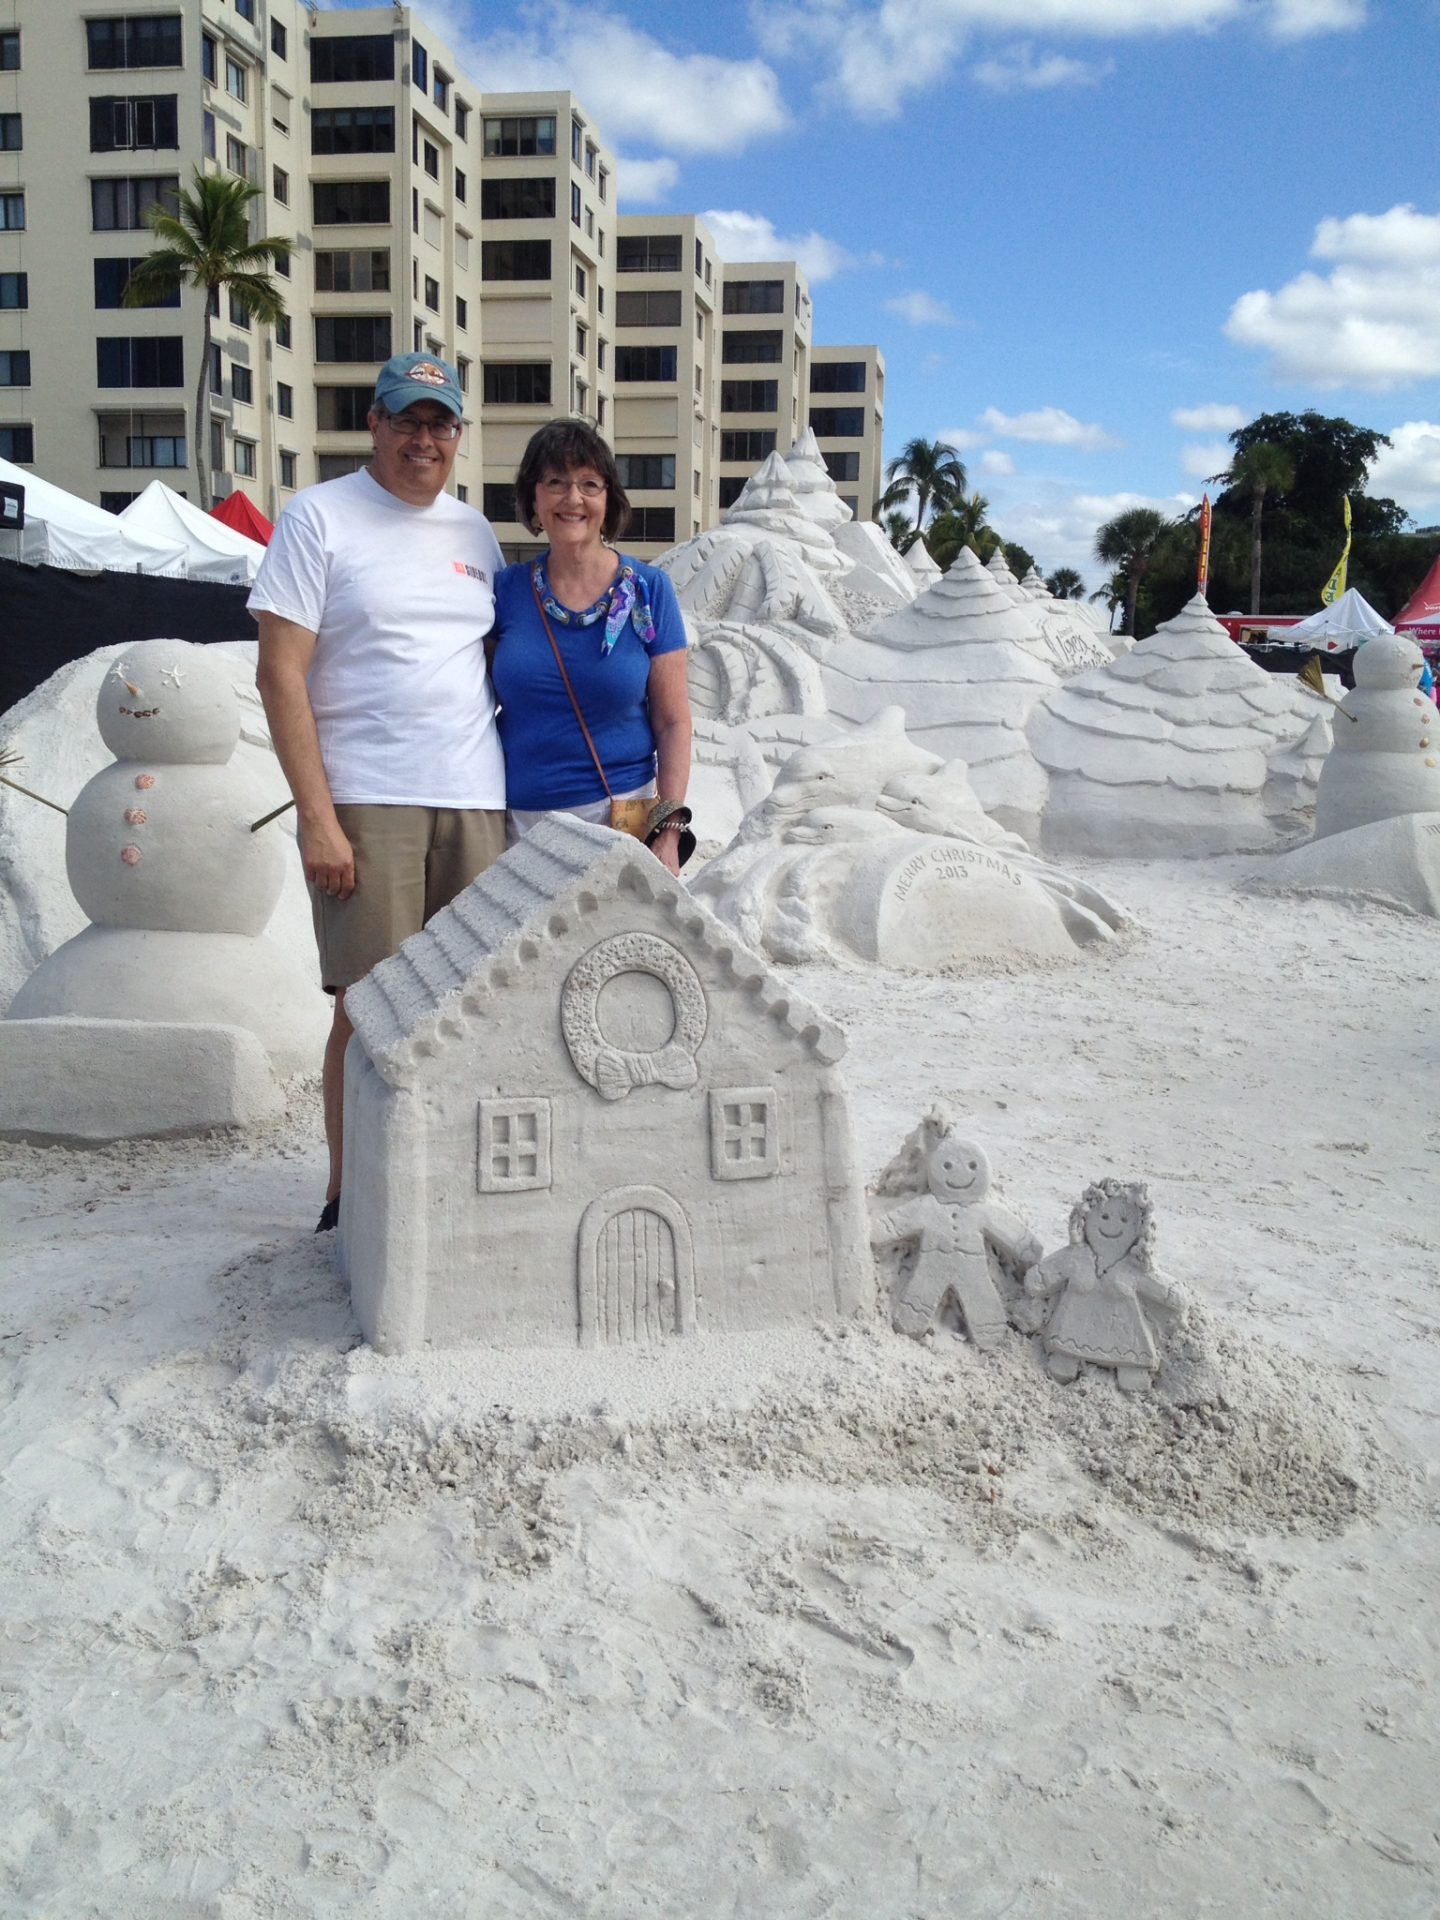 Peg and I at the National Sand Sculpture contest at Ft. Myers beach. Peg loved the beach and especially walking on the sand.